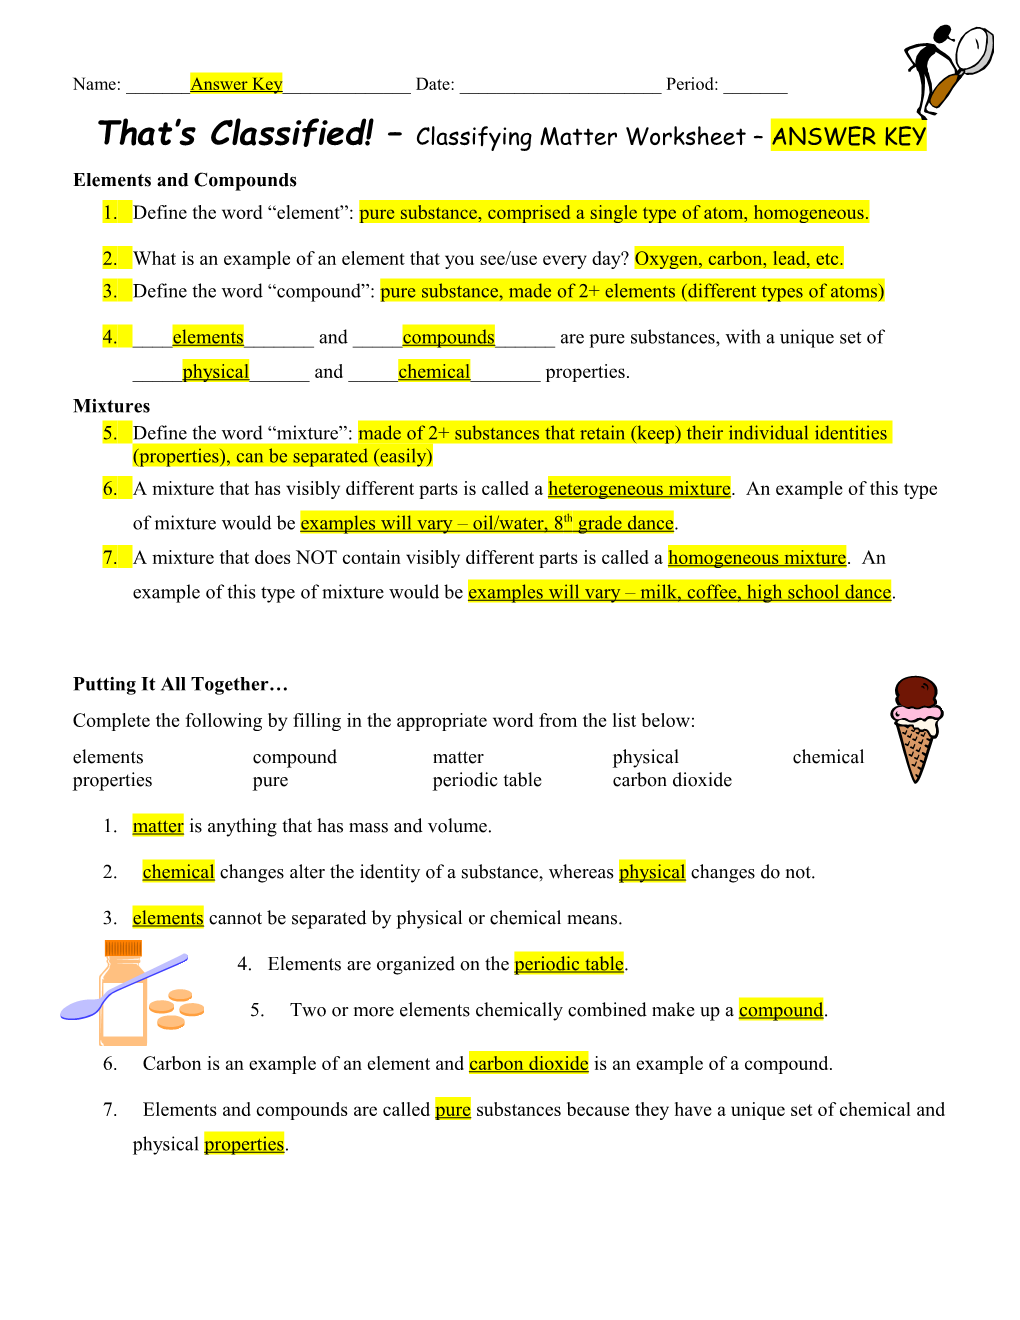 That S Classified! Classifying Matter Worksheet ANSWER KEY